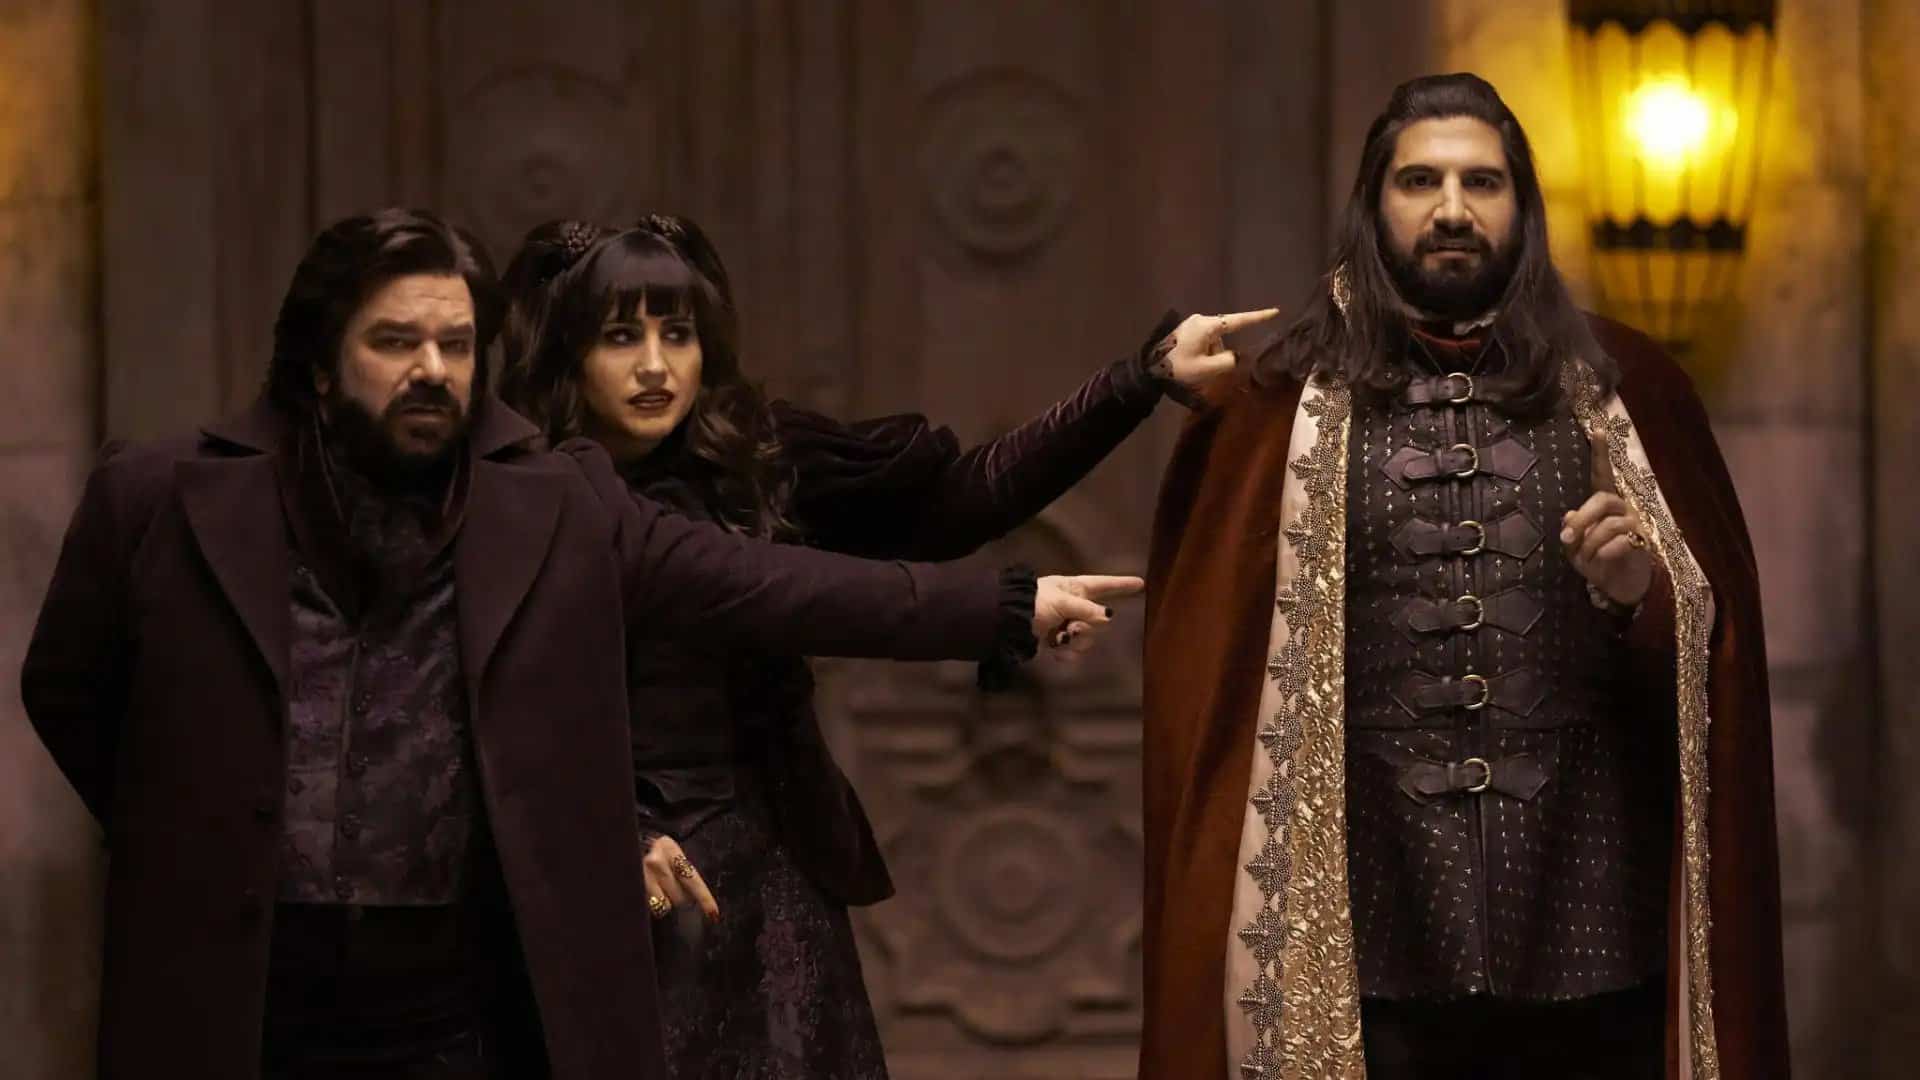 What We Do in the Shadows series